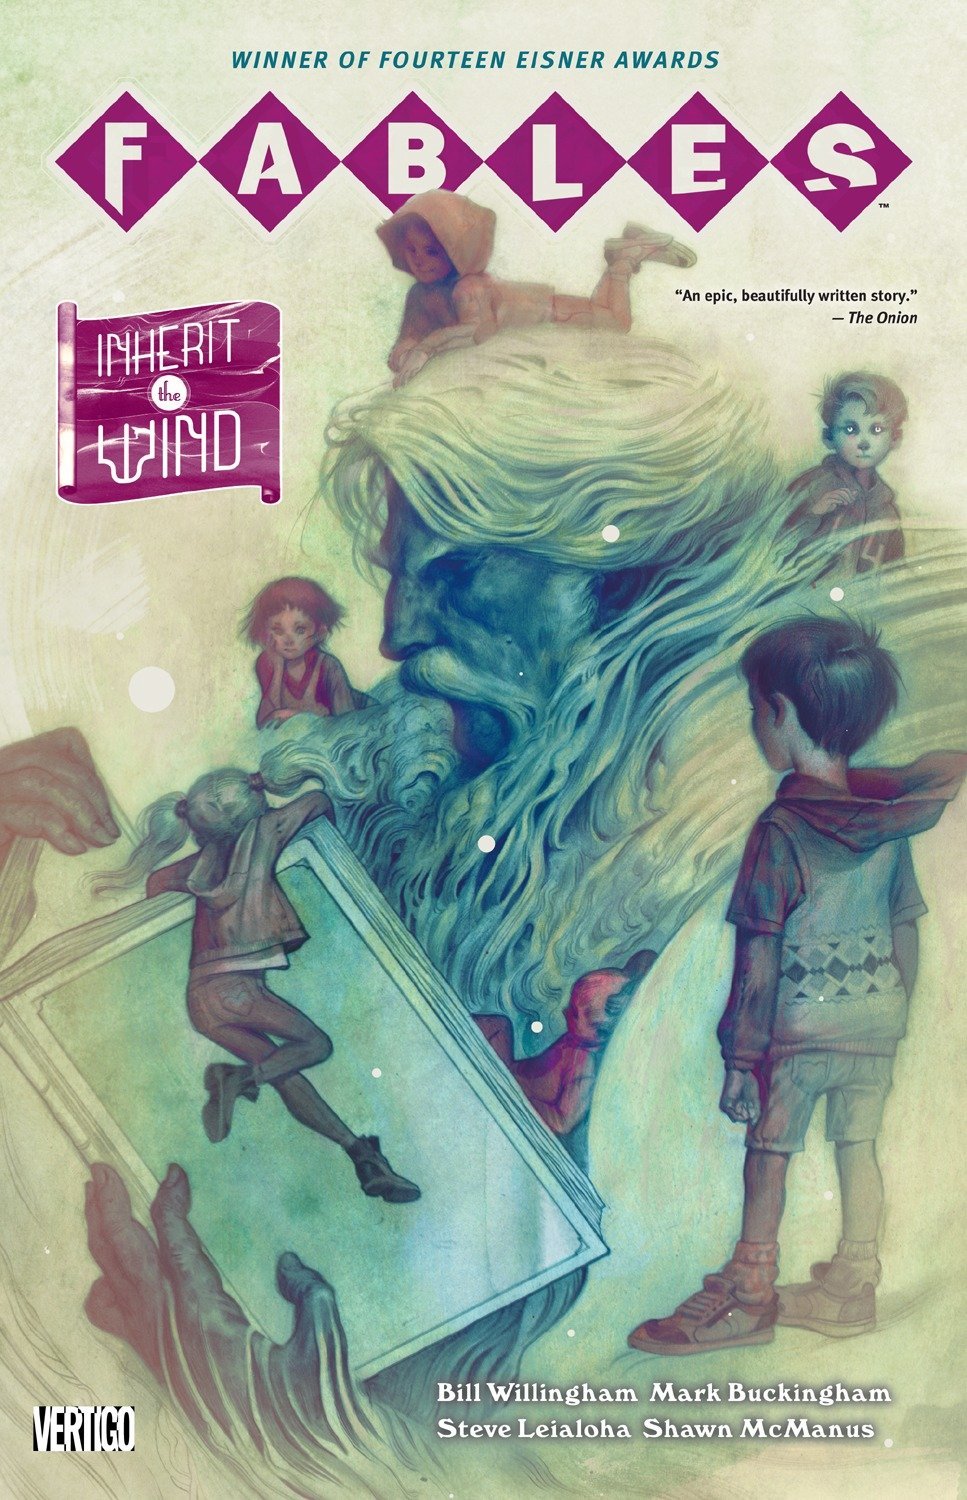 Fables, Vol. 17: Inherit the Wind by Bill Willingham